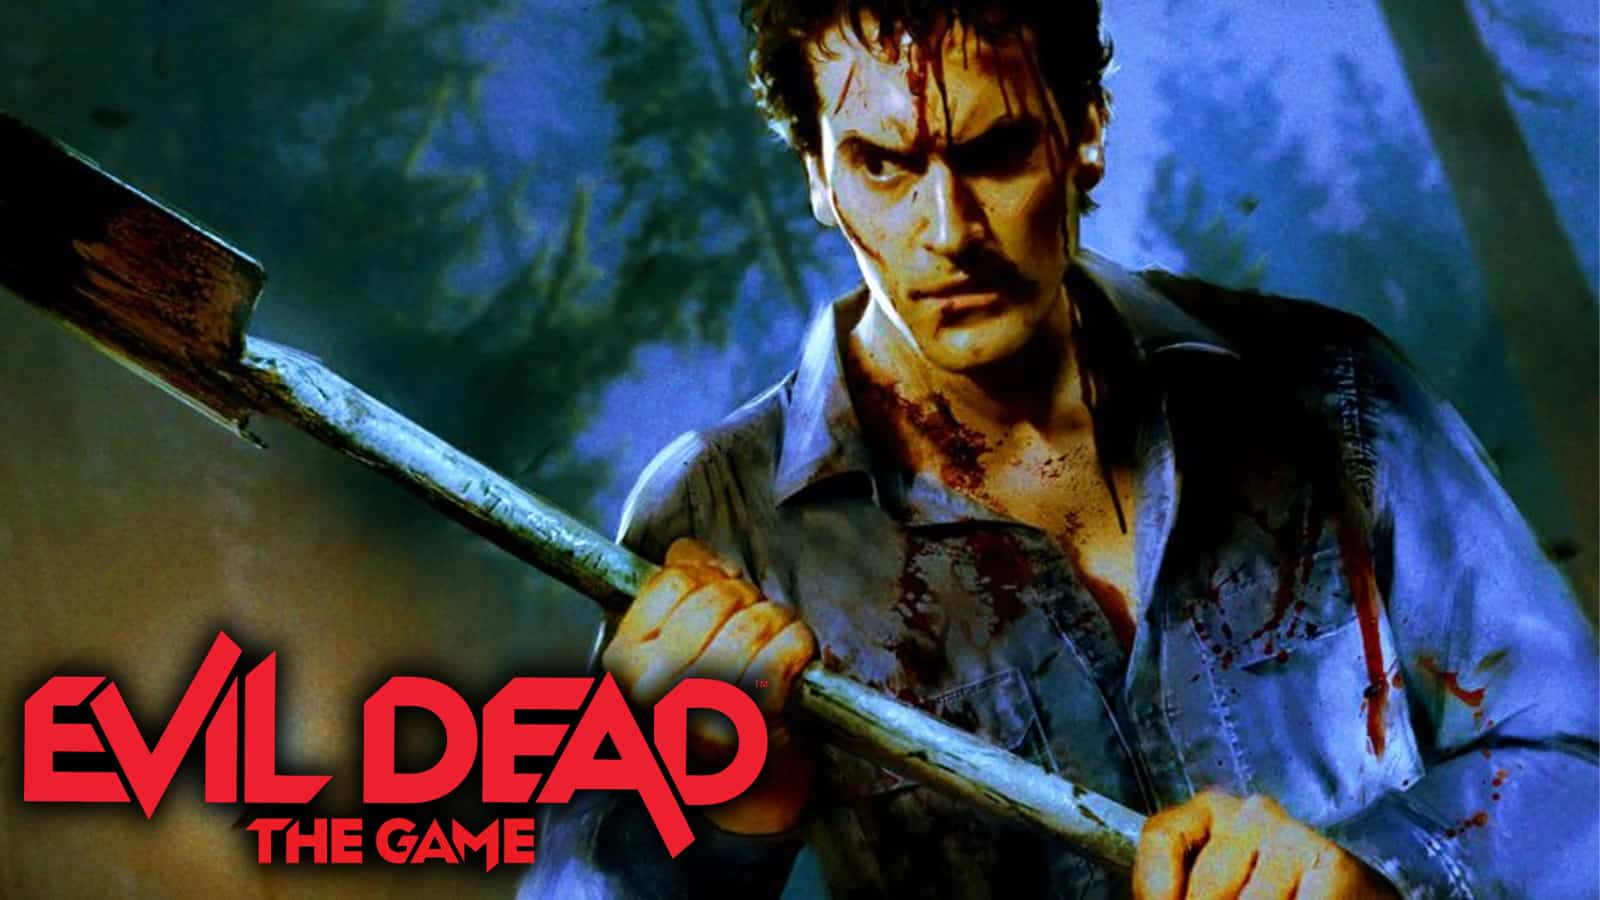 Fun Fact: The Evil Dead game has an update on the 26th, feat